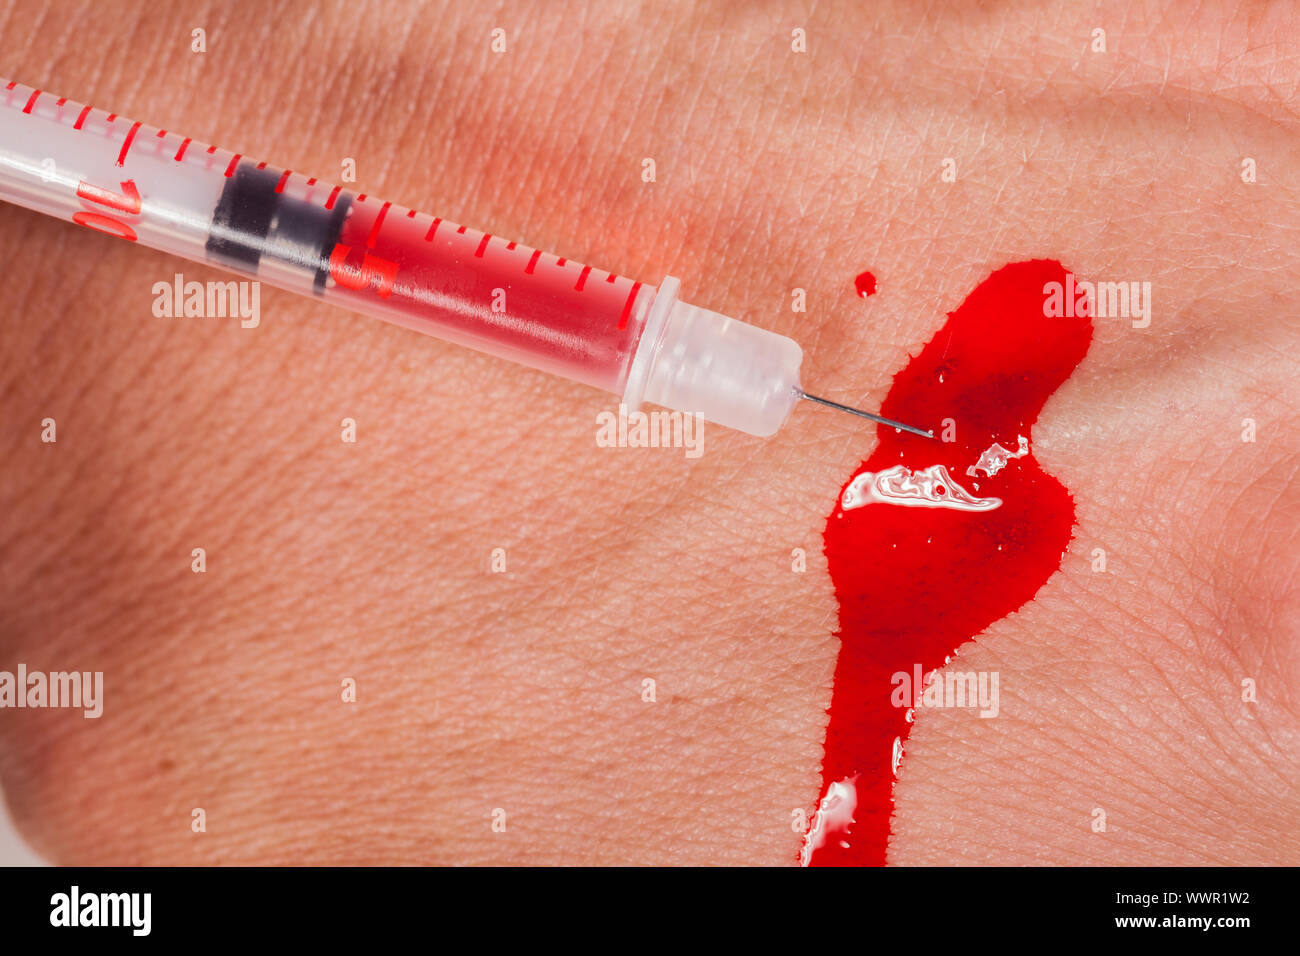 Subcutaneous medical injection concept Stock Photo